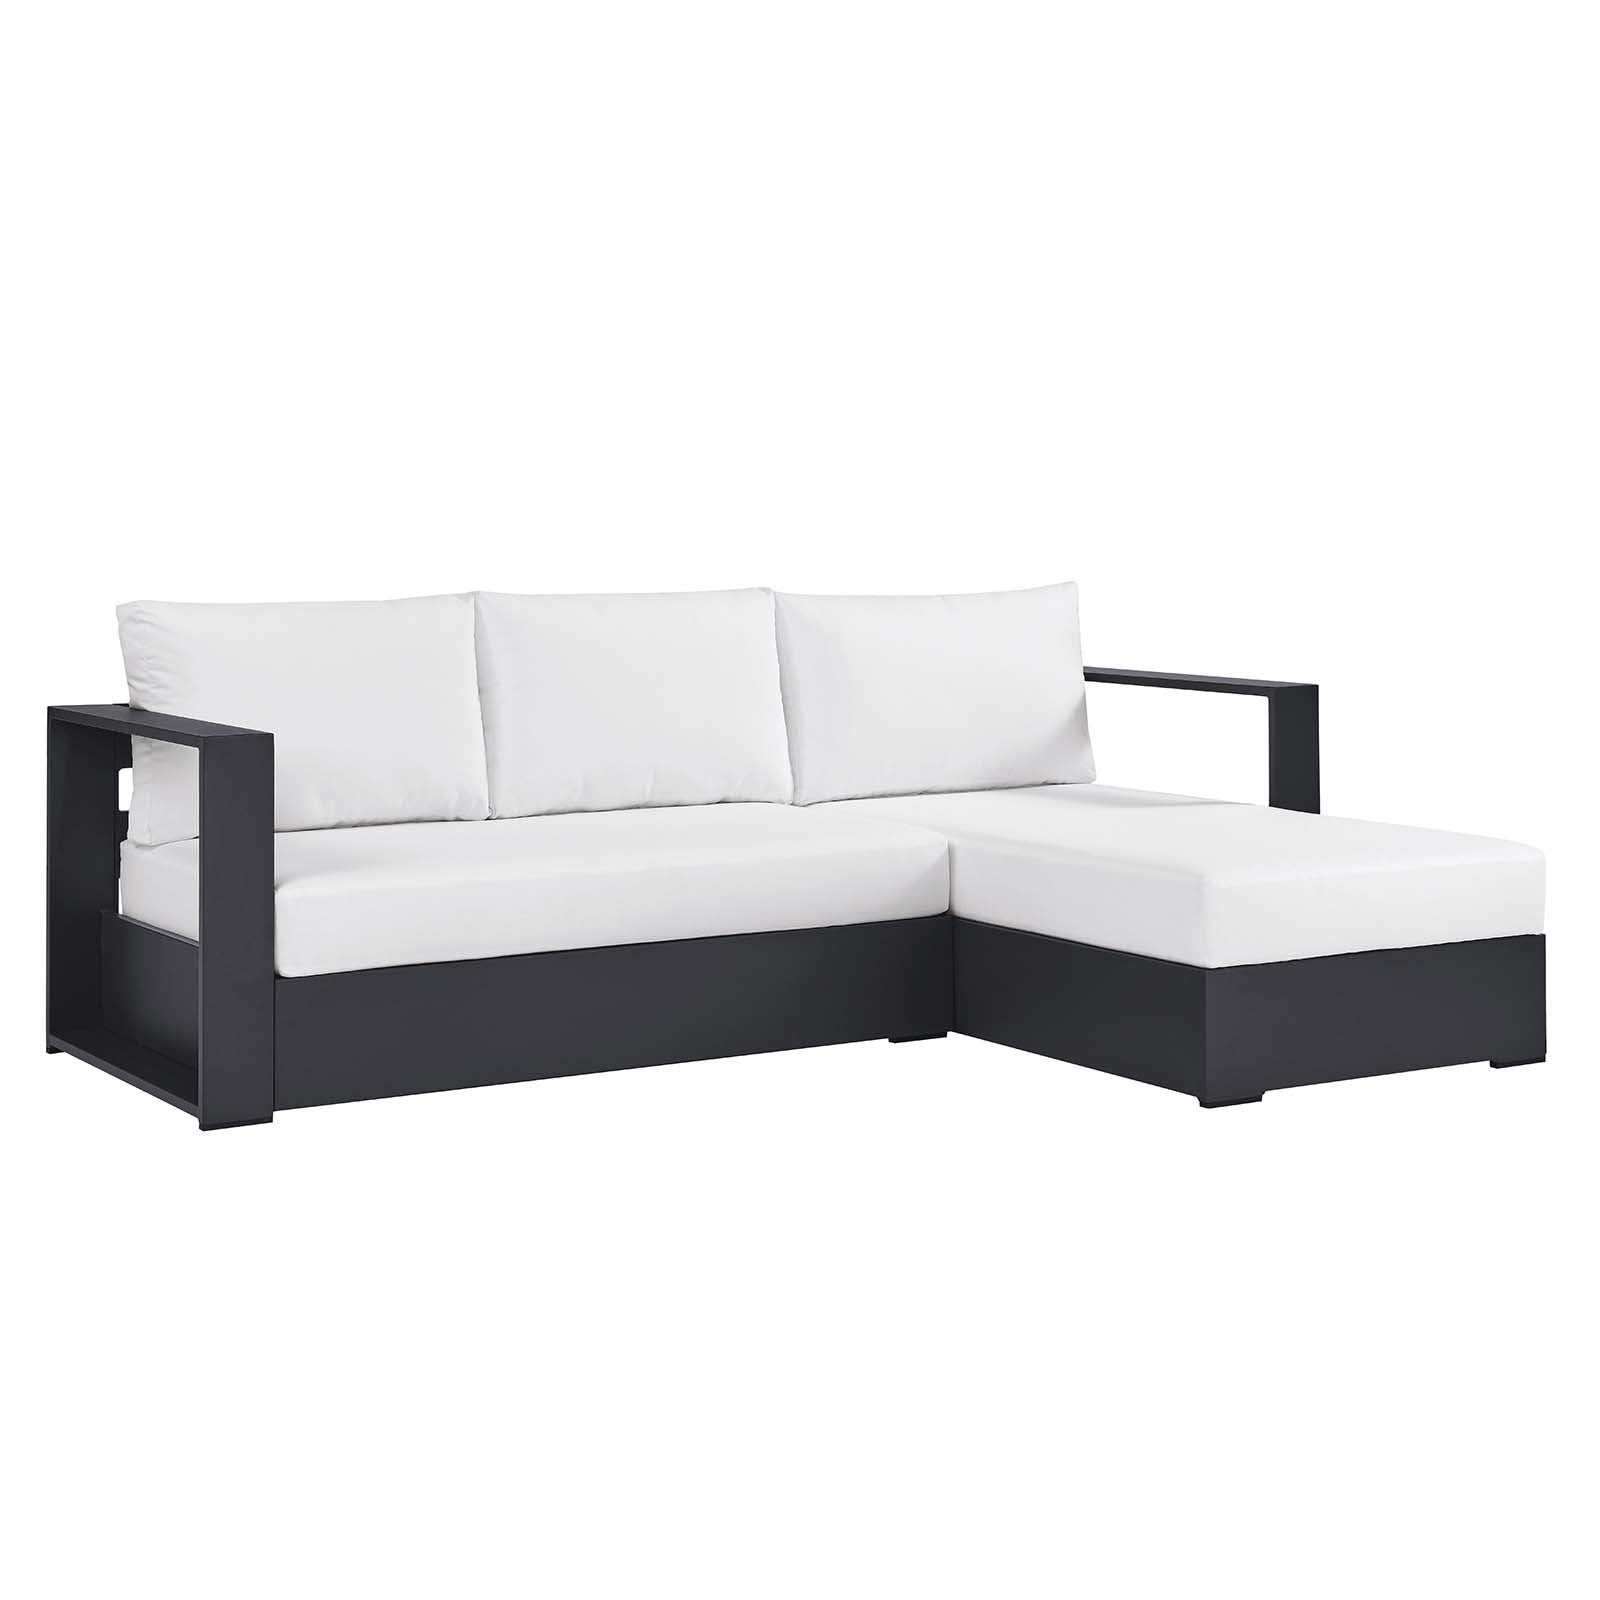 Tahoe Outdoor Patio Powder-Coated Aluminum 2-Piece Right-Facing Chaise Sectional Sofa Set - East Shore Modern Home Furnishings